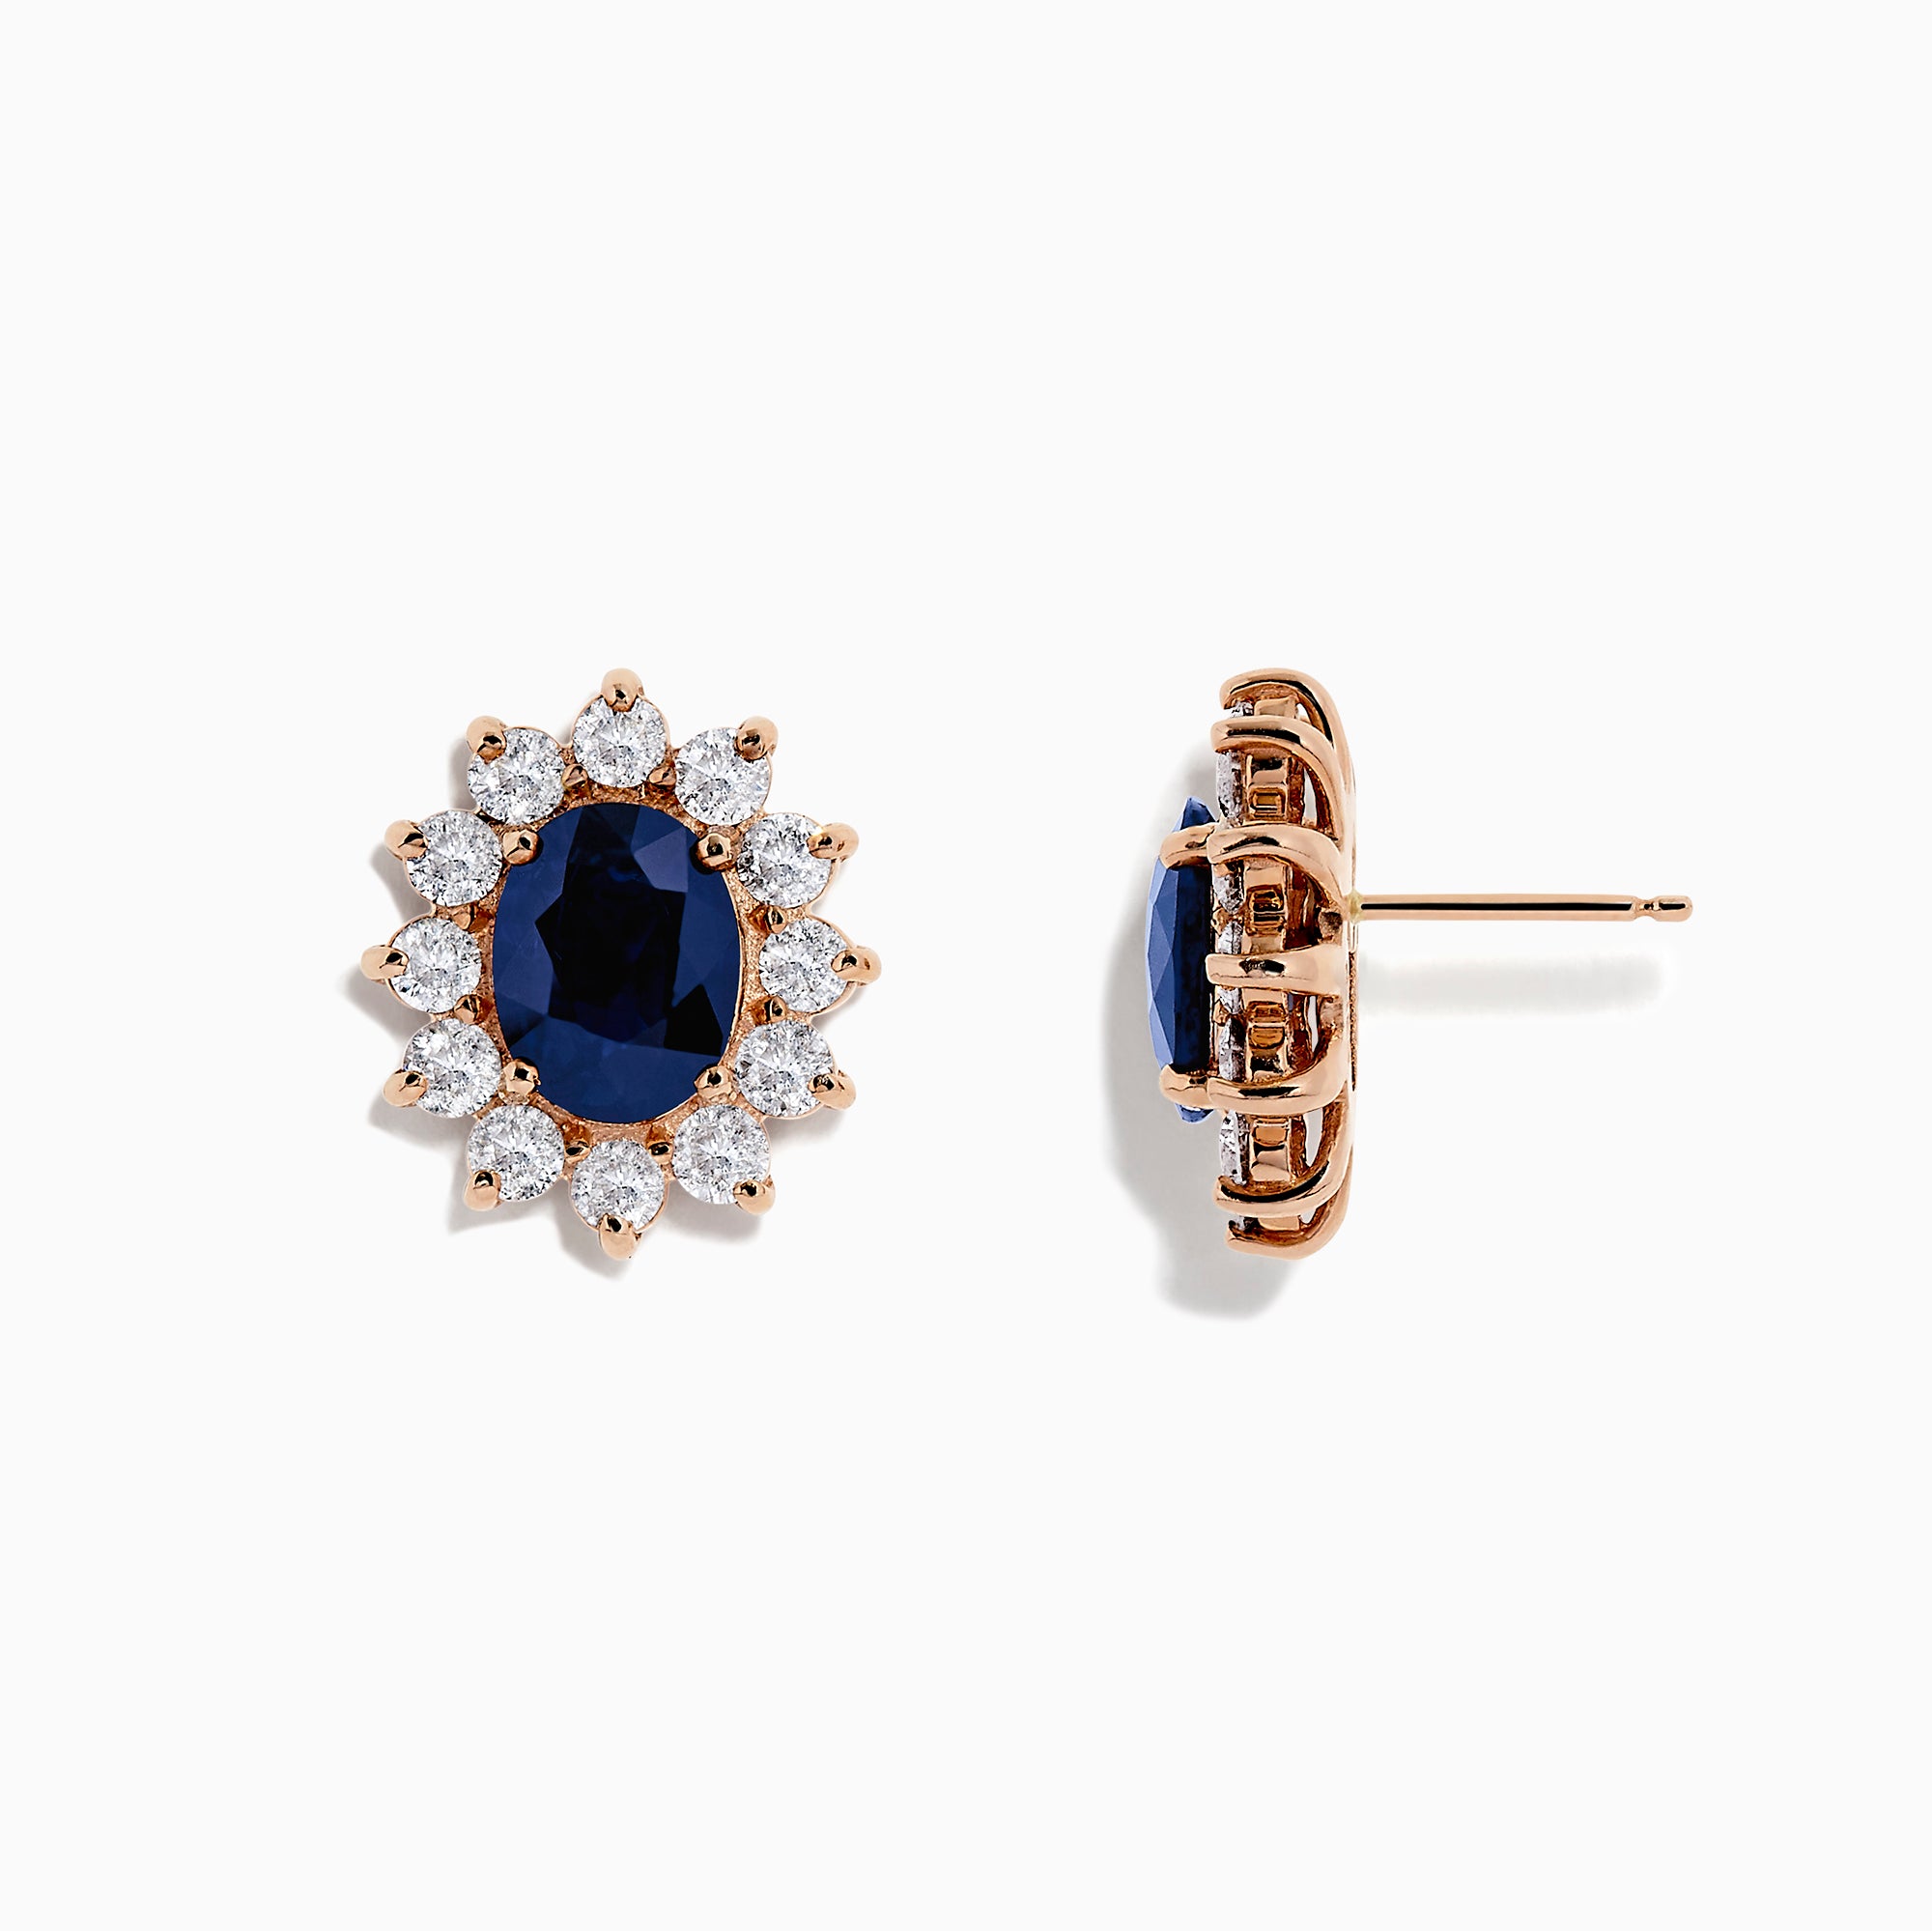 Blue Sapphire and Diamond Studs, 14k Rose Gold Earrings – Point No Point  Studio